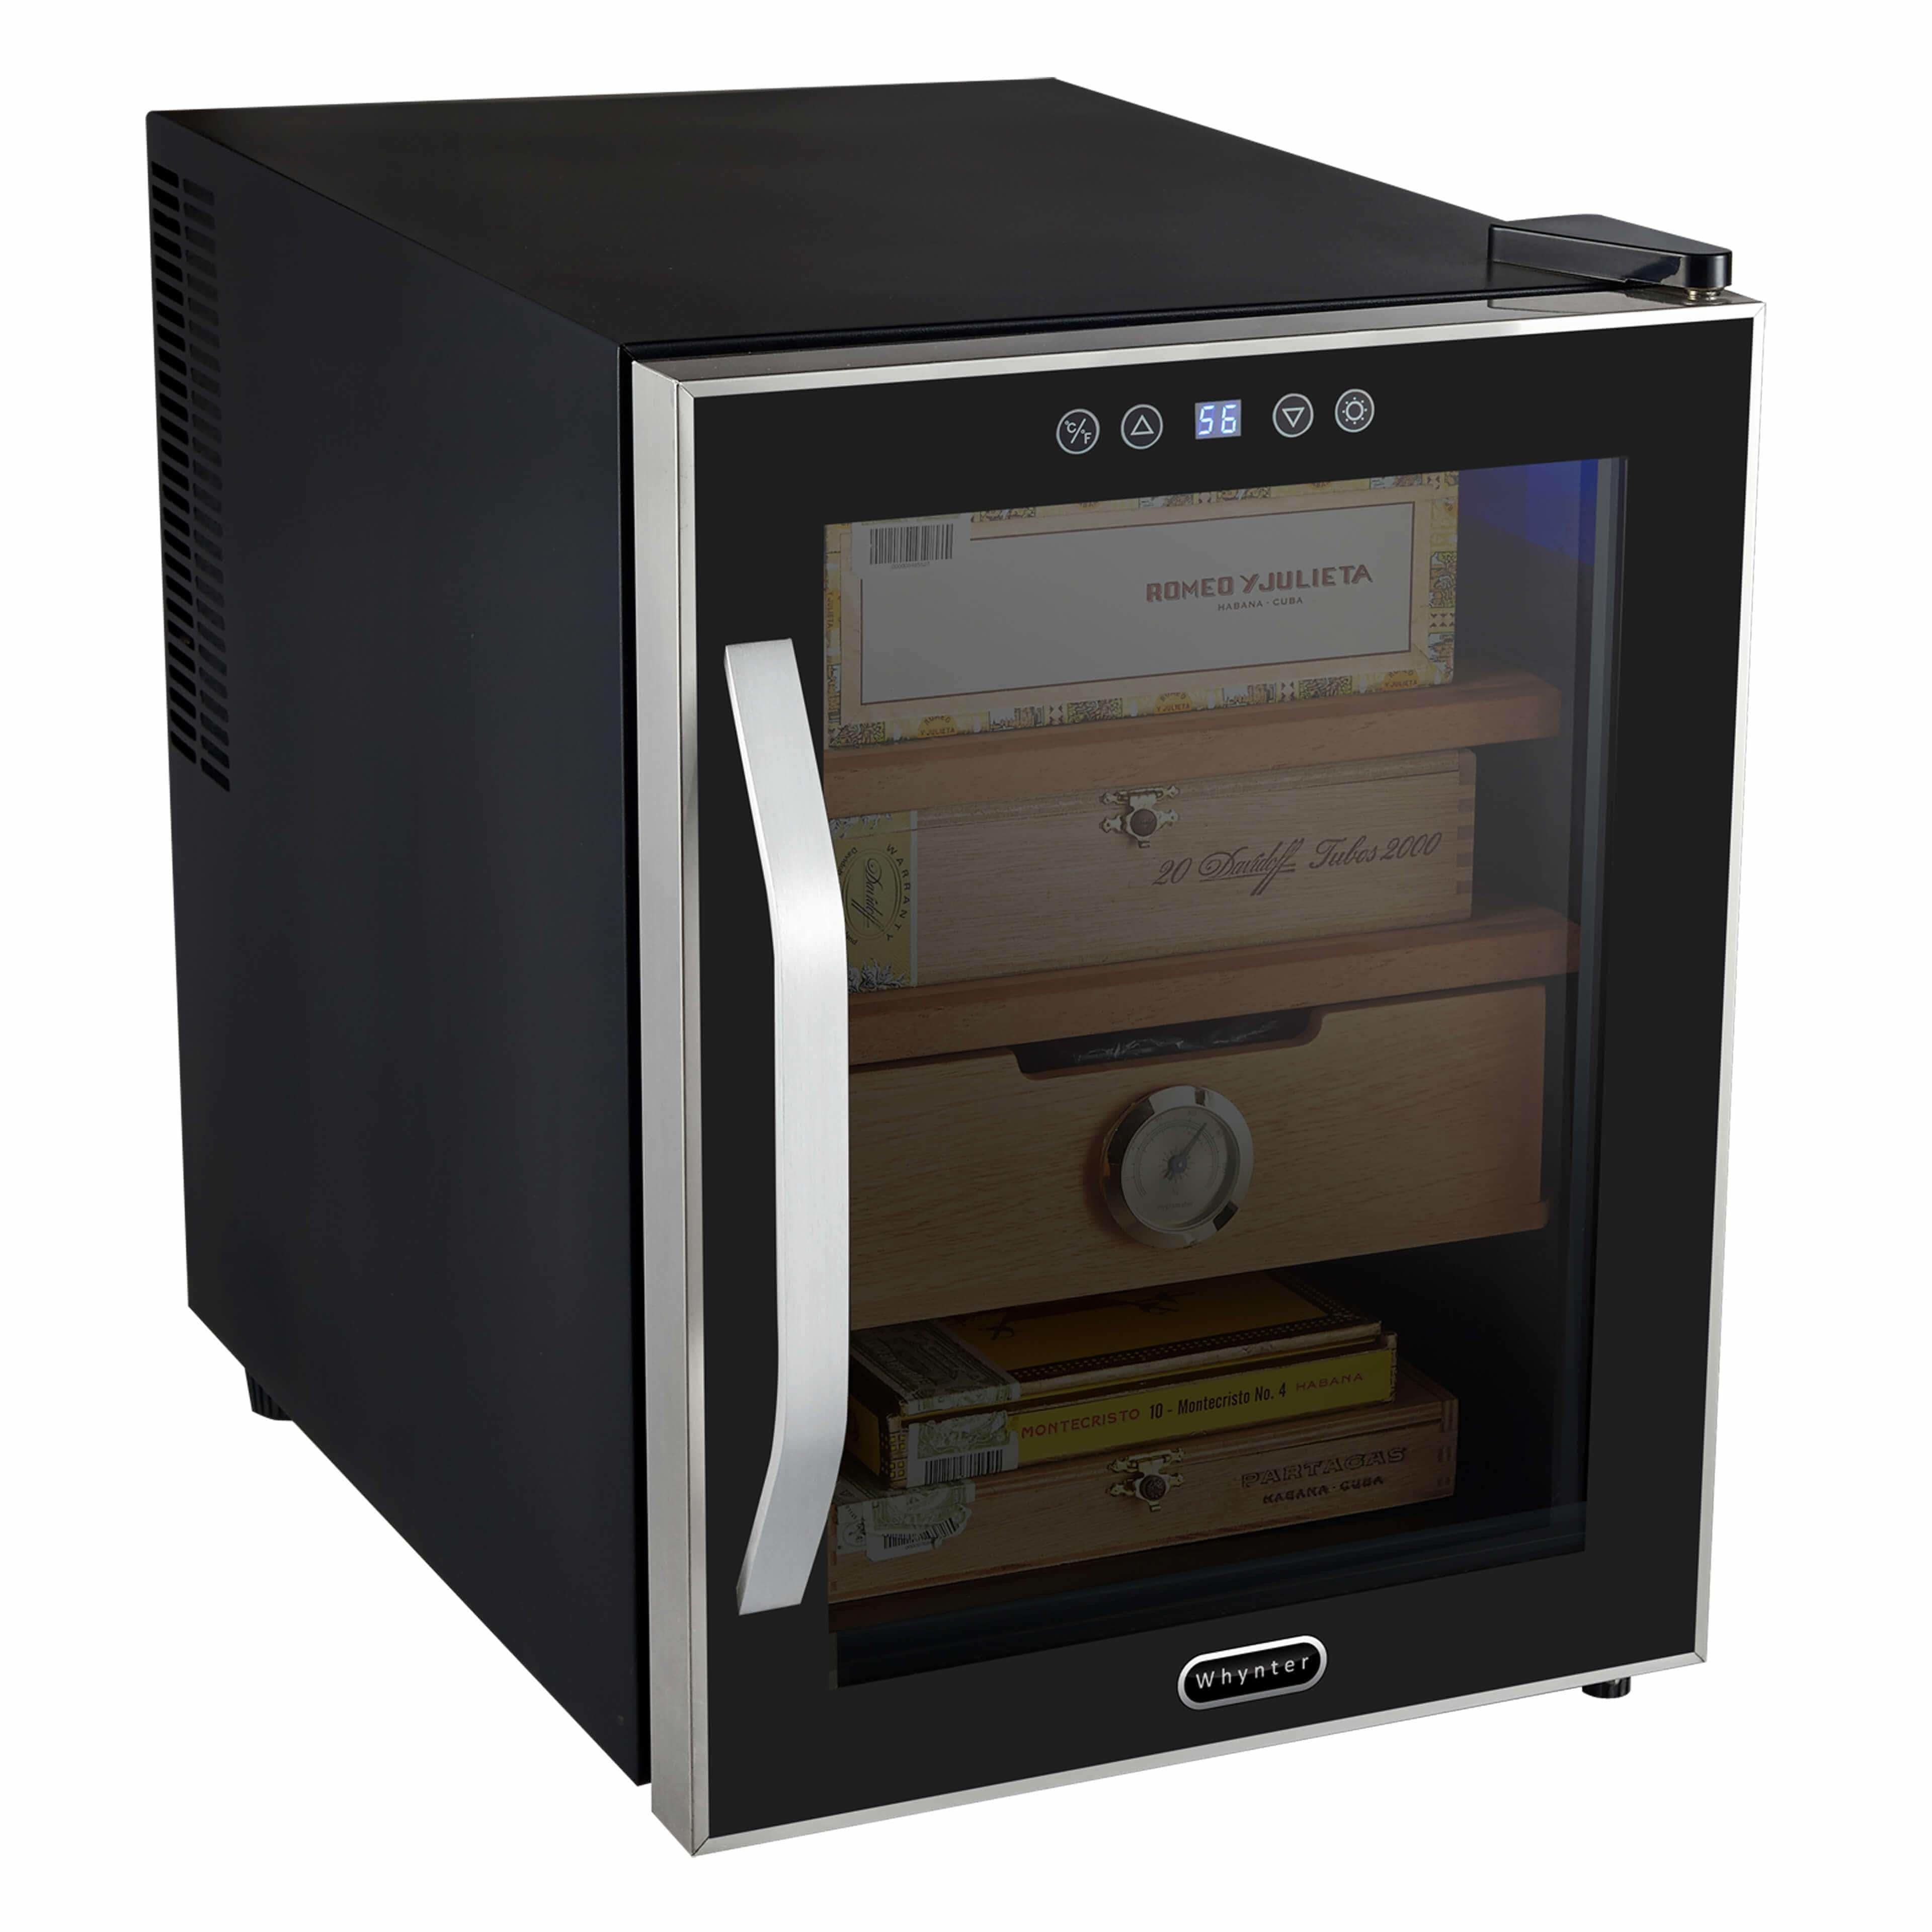 Whynter Elite Touch Control Stainless 1.2 cu.ft. Cigar Cooler Humidor CHC-122BD Wine Coolers Empire